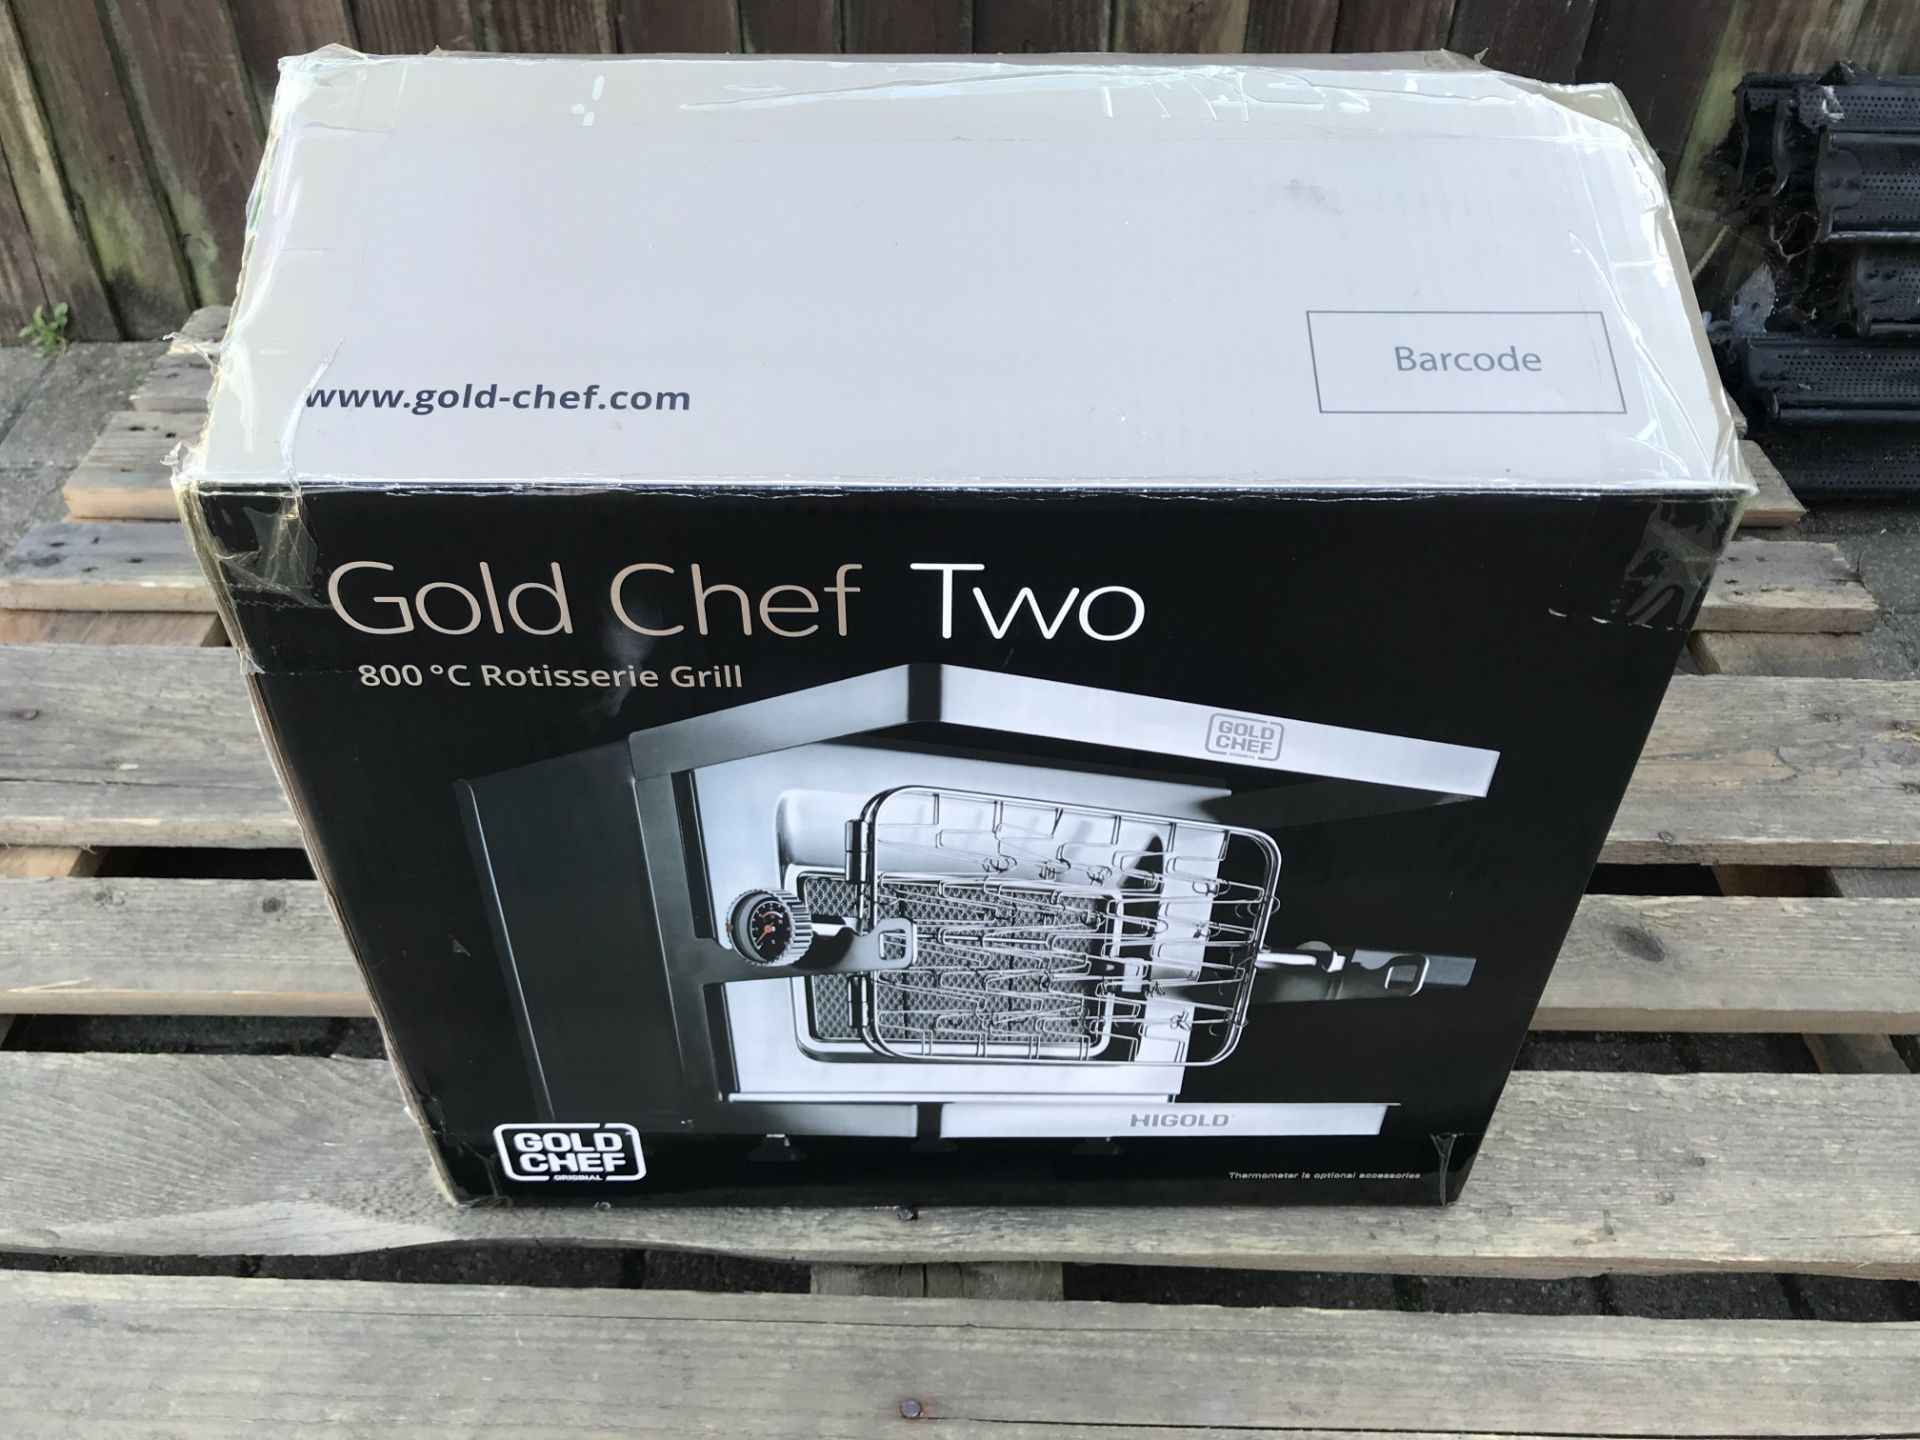 GOLD CHEF TWO 800C ROTISSERIE GRILL - Image 2 of 6